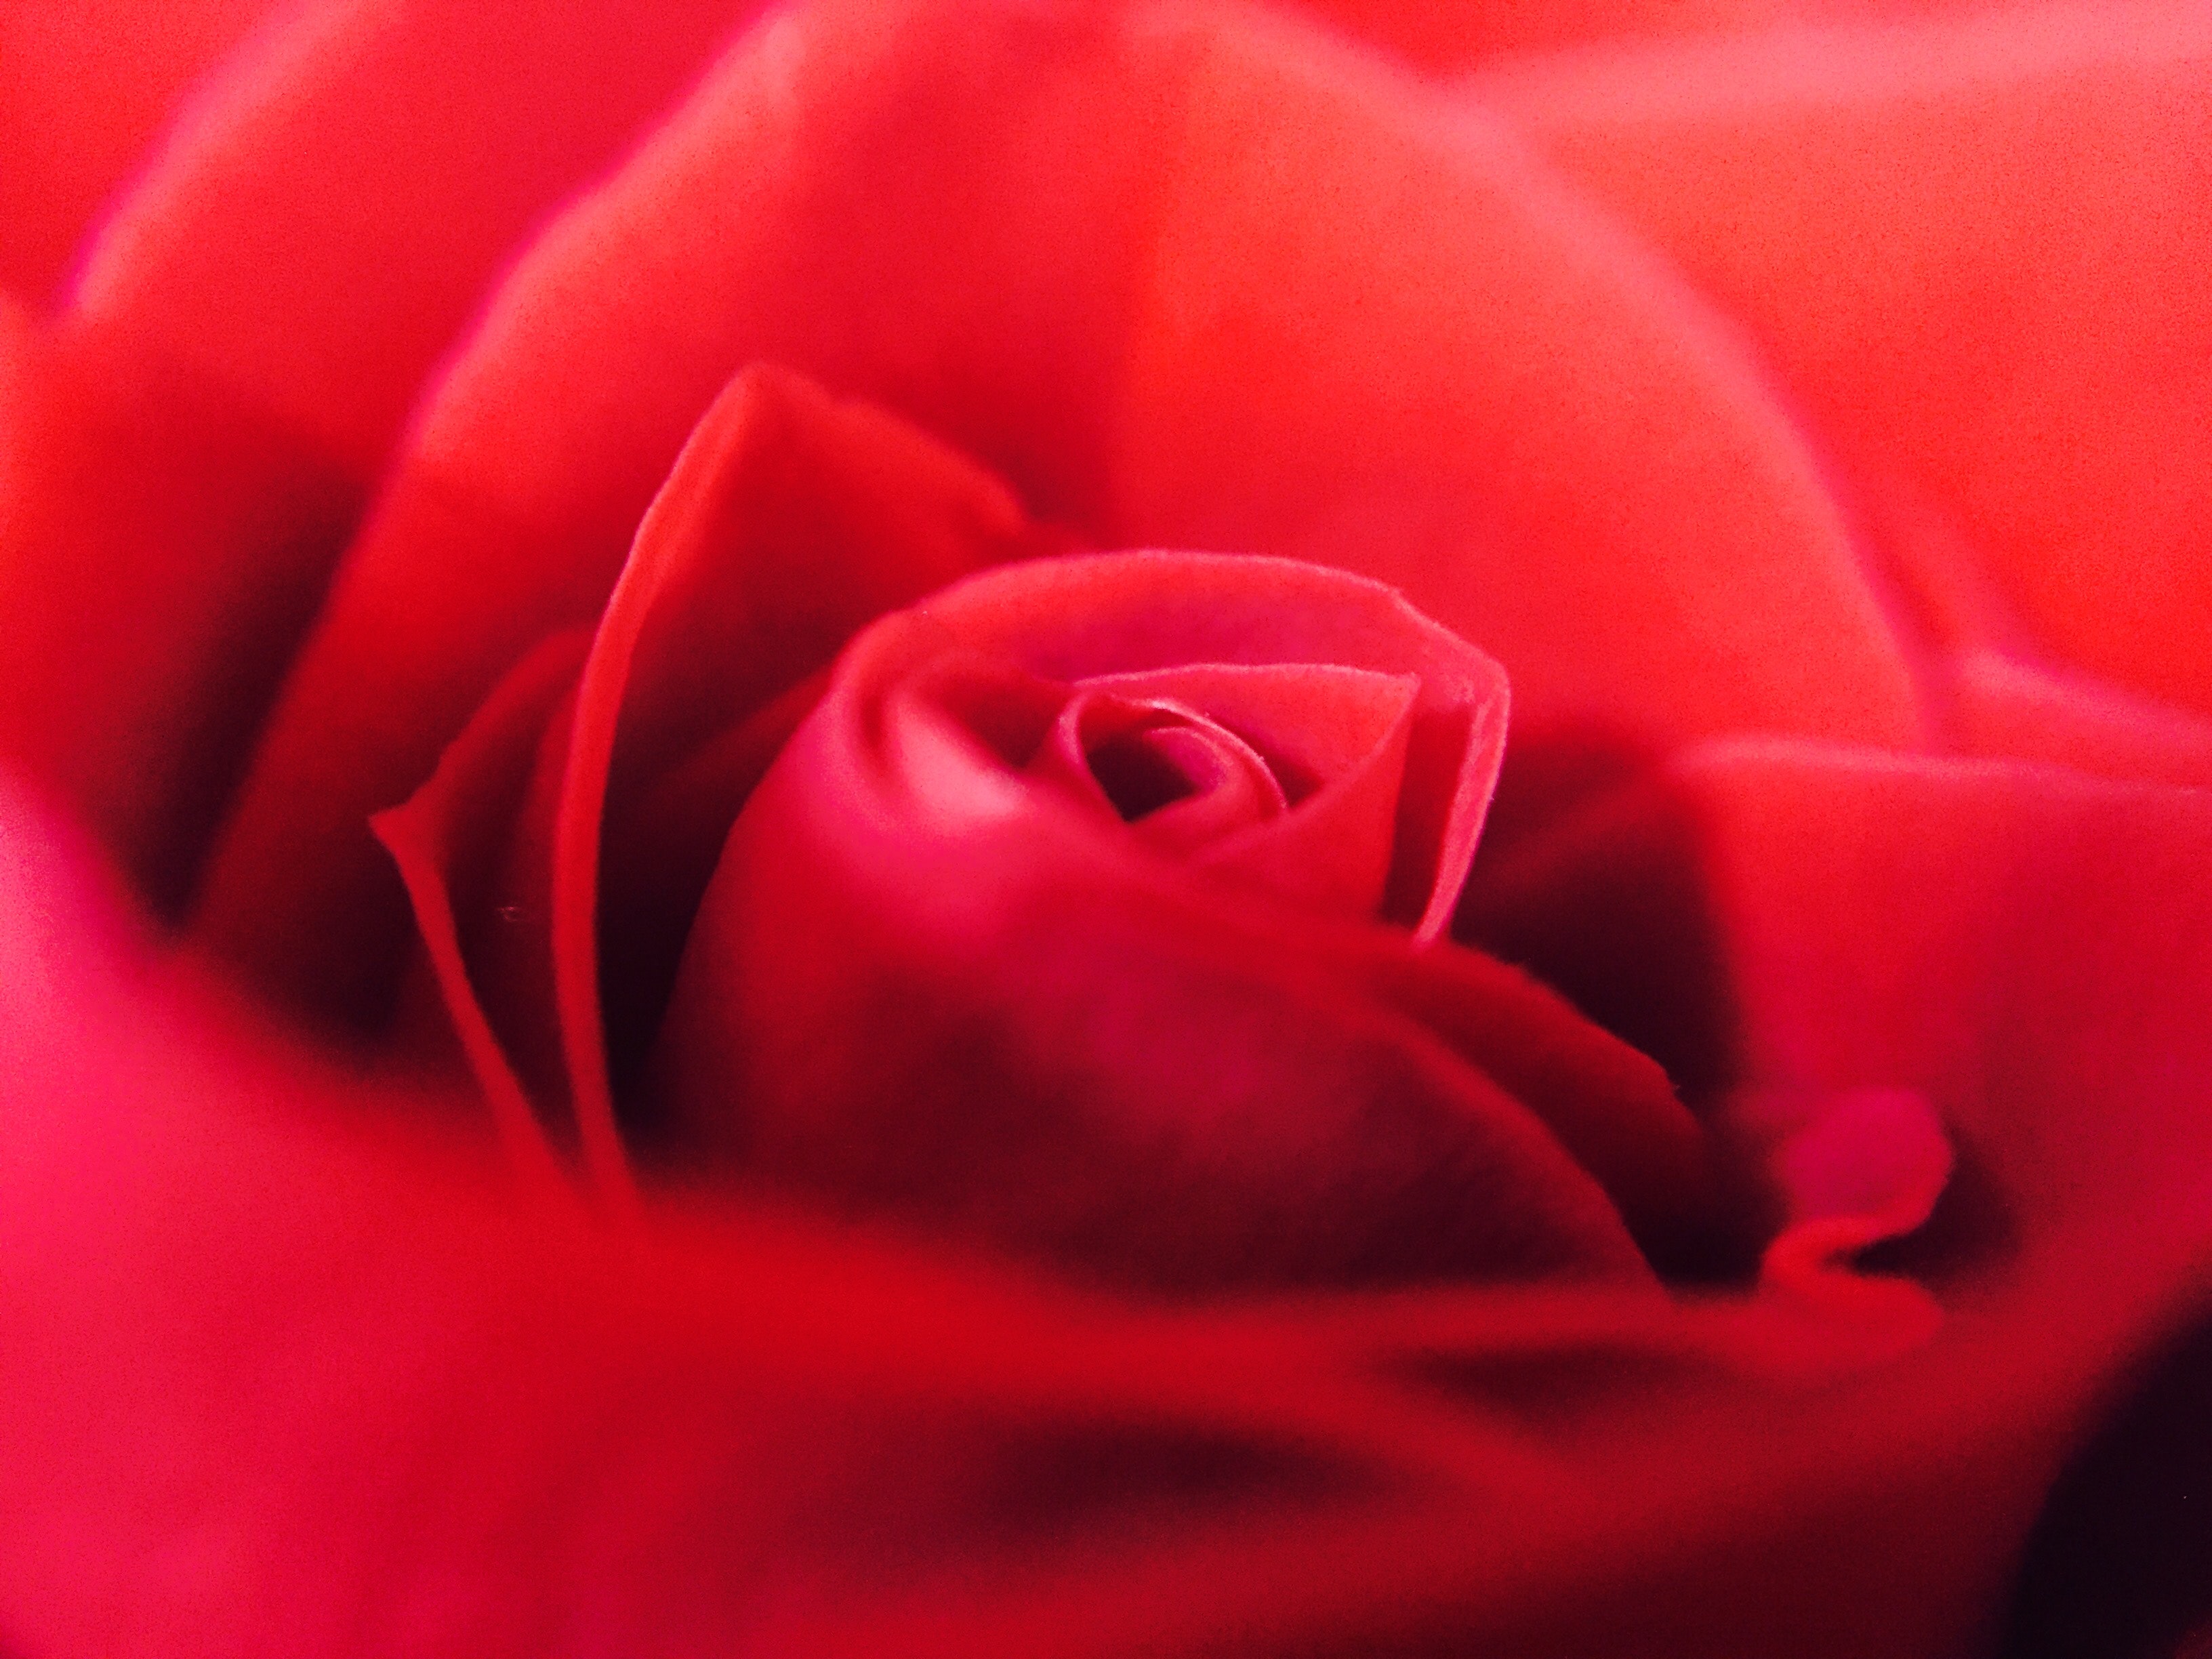 Red rose close-up photo